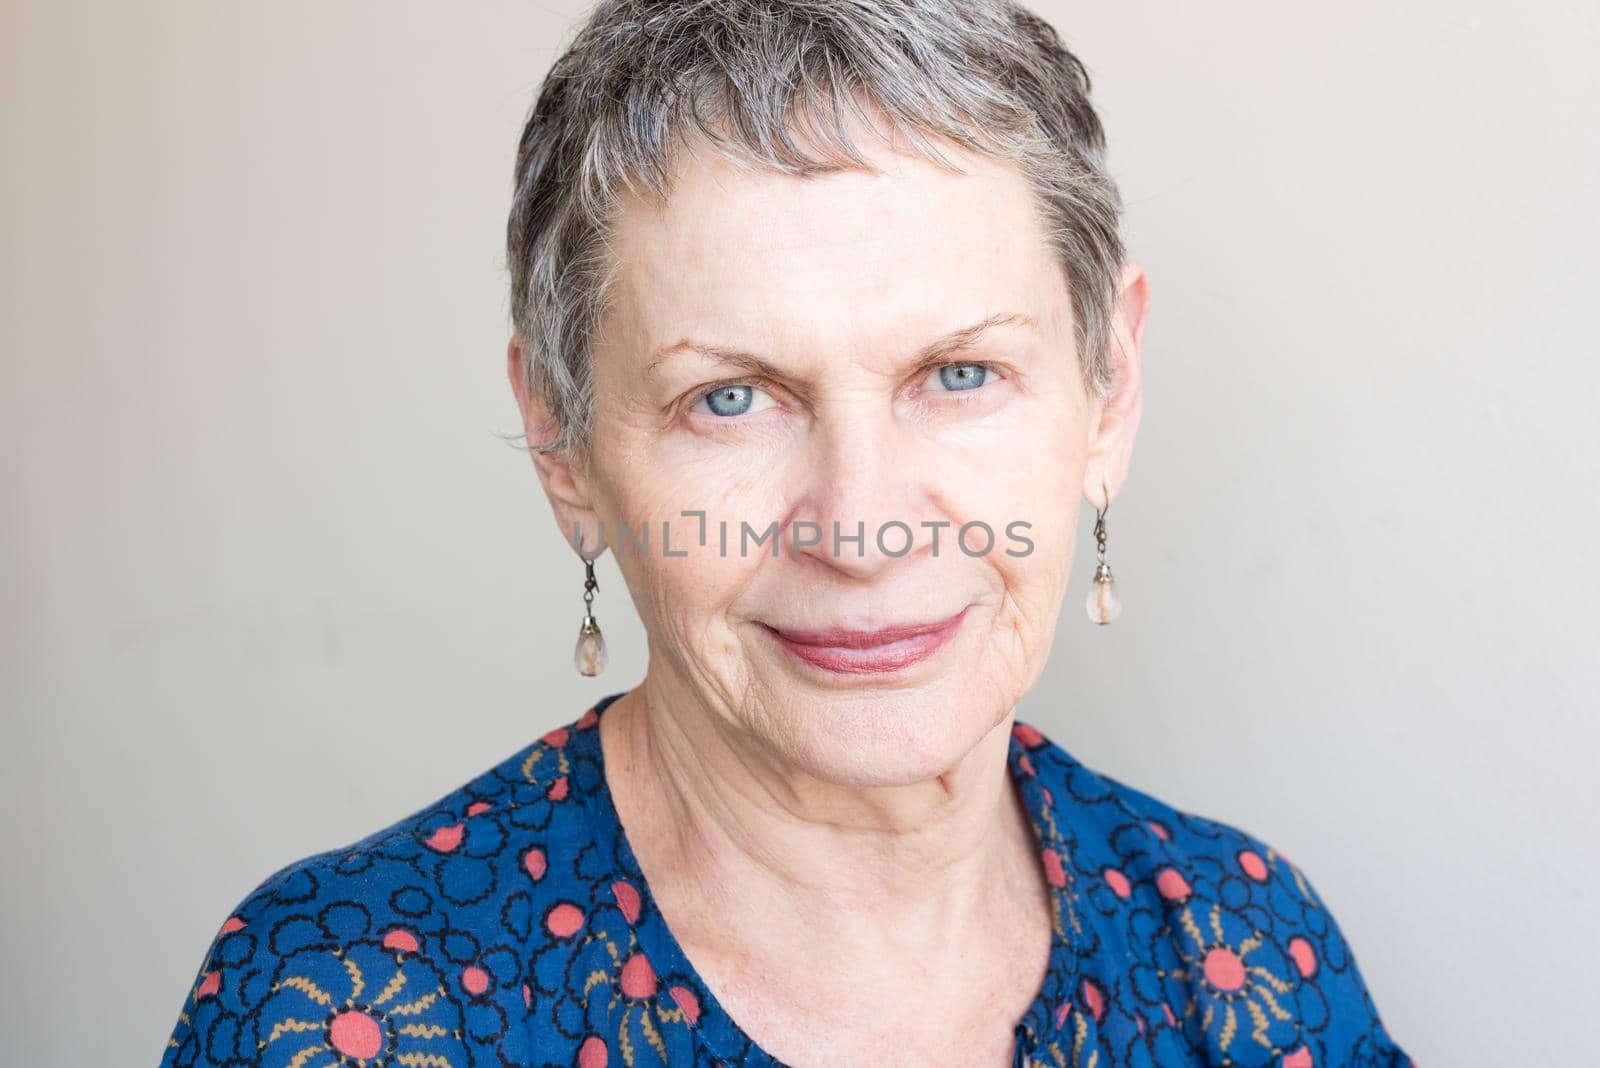 Portrait of older woman with drop earrings and blue top against neutral background by natalie_board